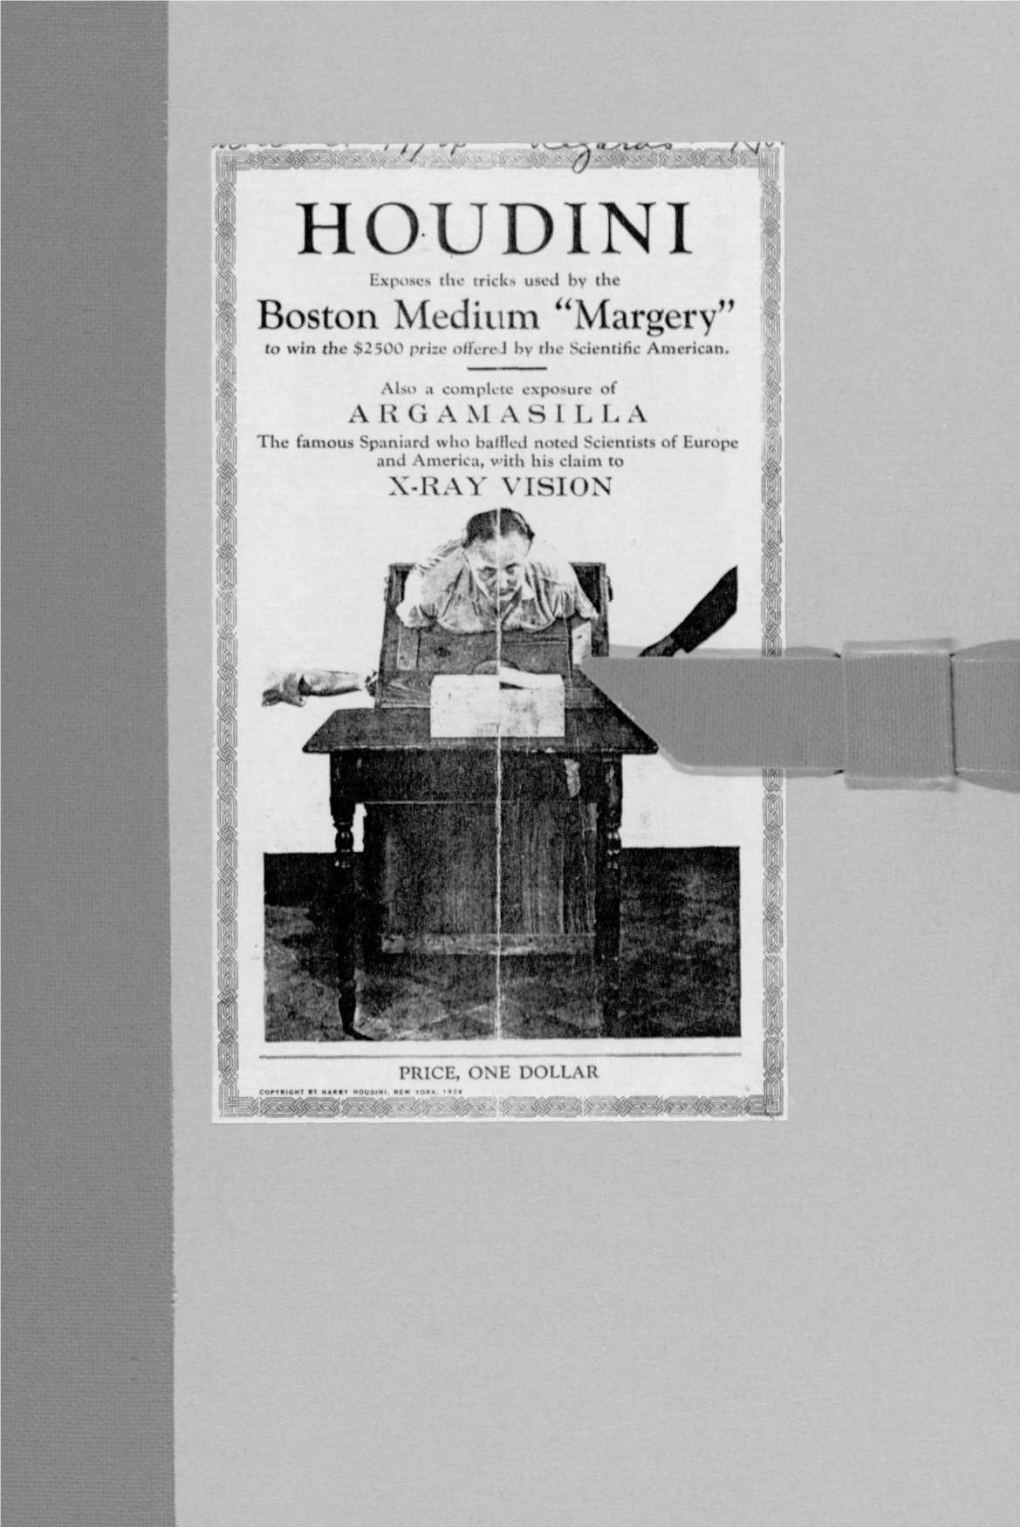 HOUDINI Exposes the Tricks Used by the Boston Medium "Margery" to Win the $2500 Prize Offered by the Scientific American